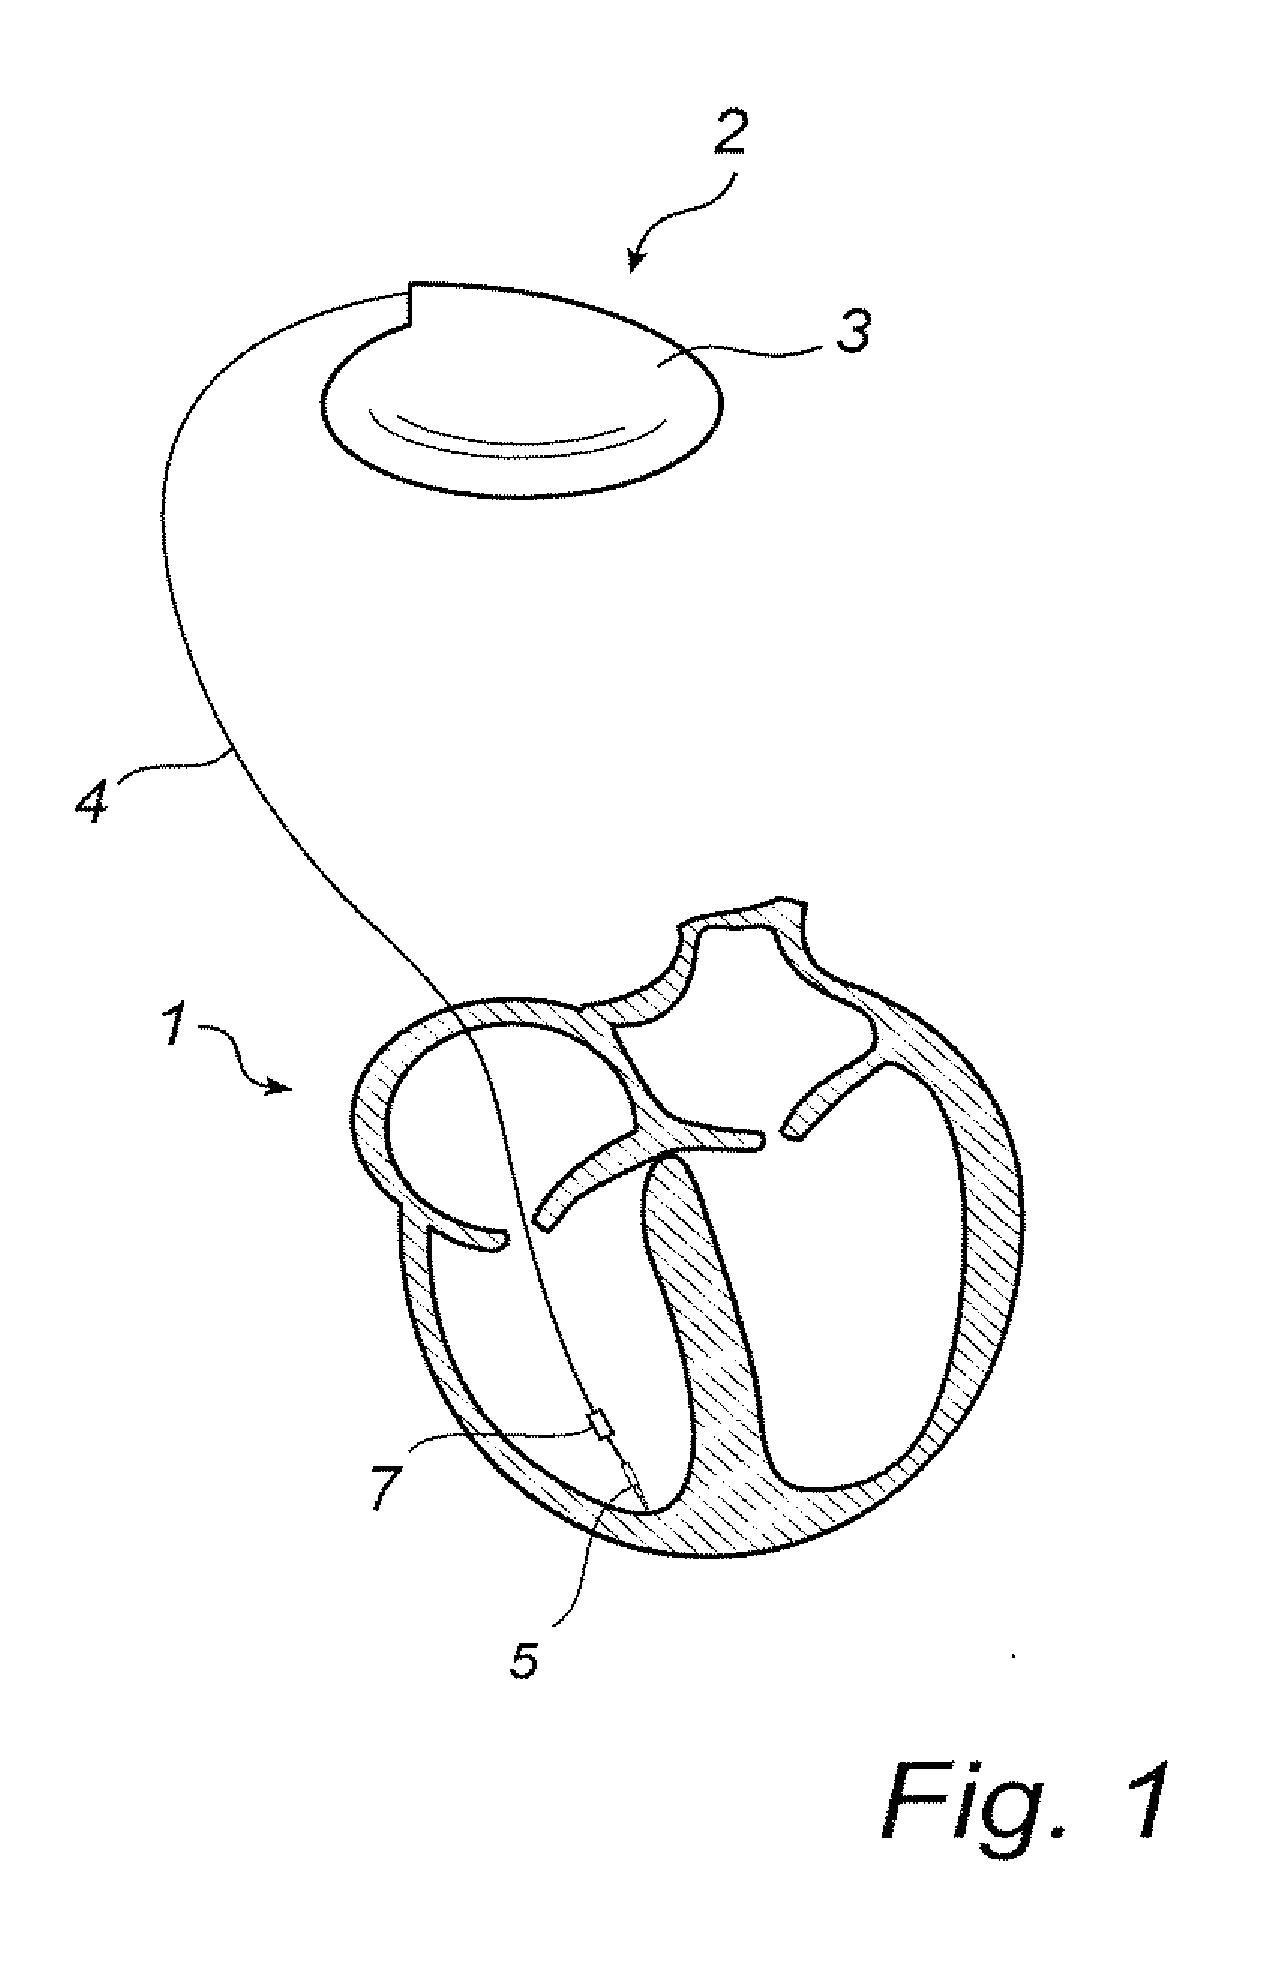 Implantable Lead with a Stimulating Electrode and a Mapping Electrode that is Electrically Disconnectable